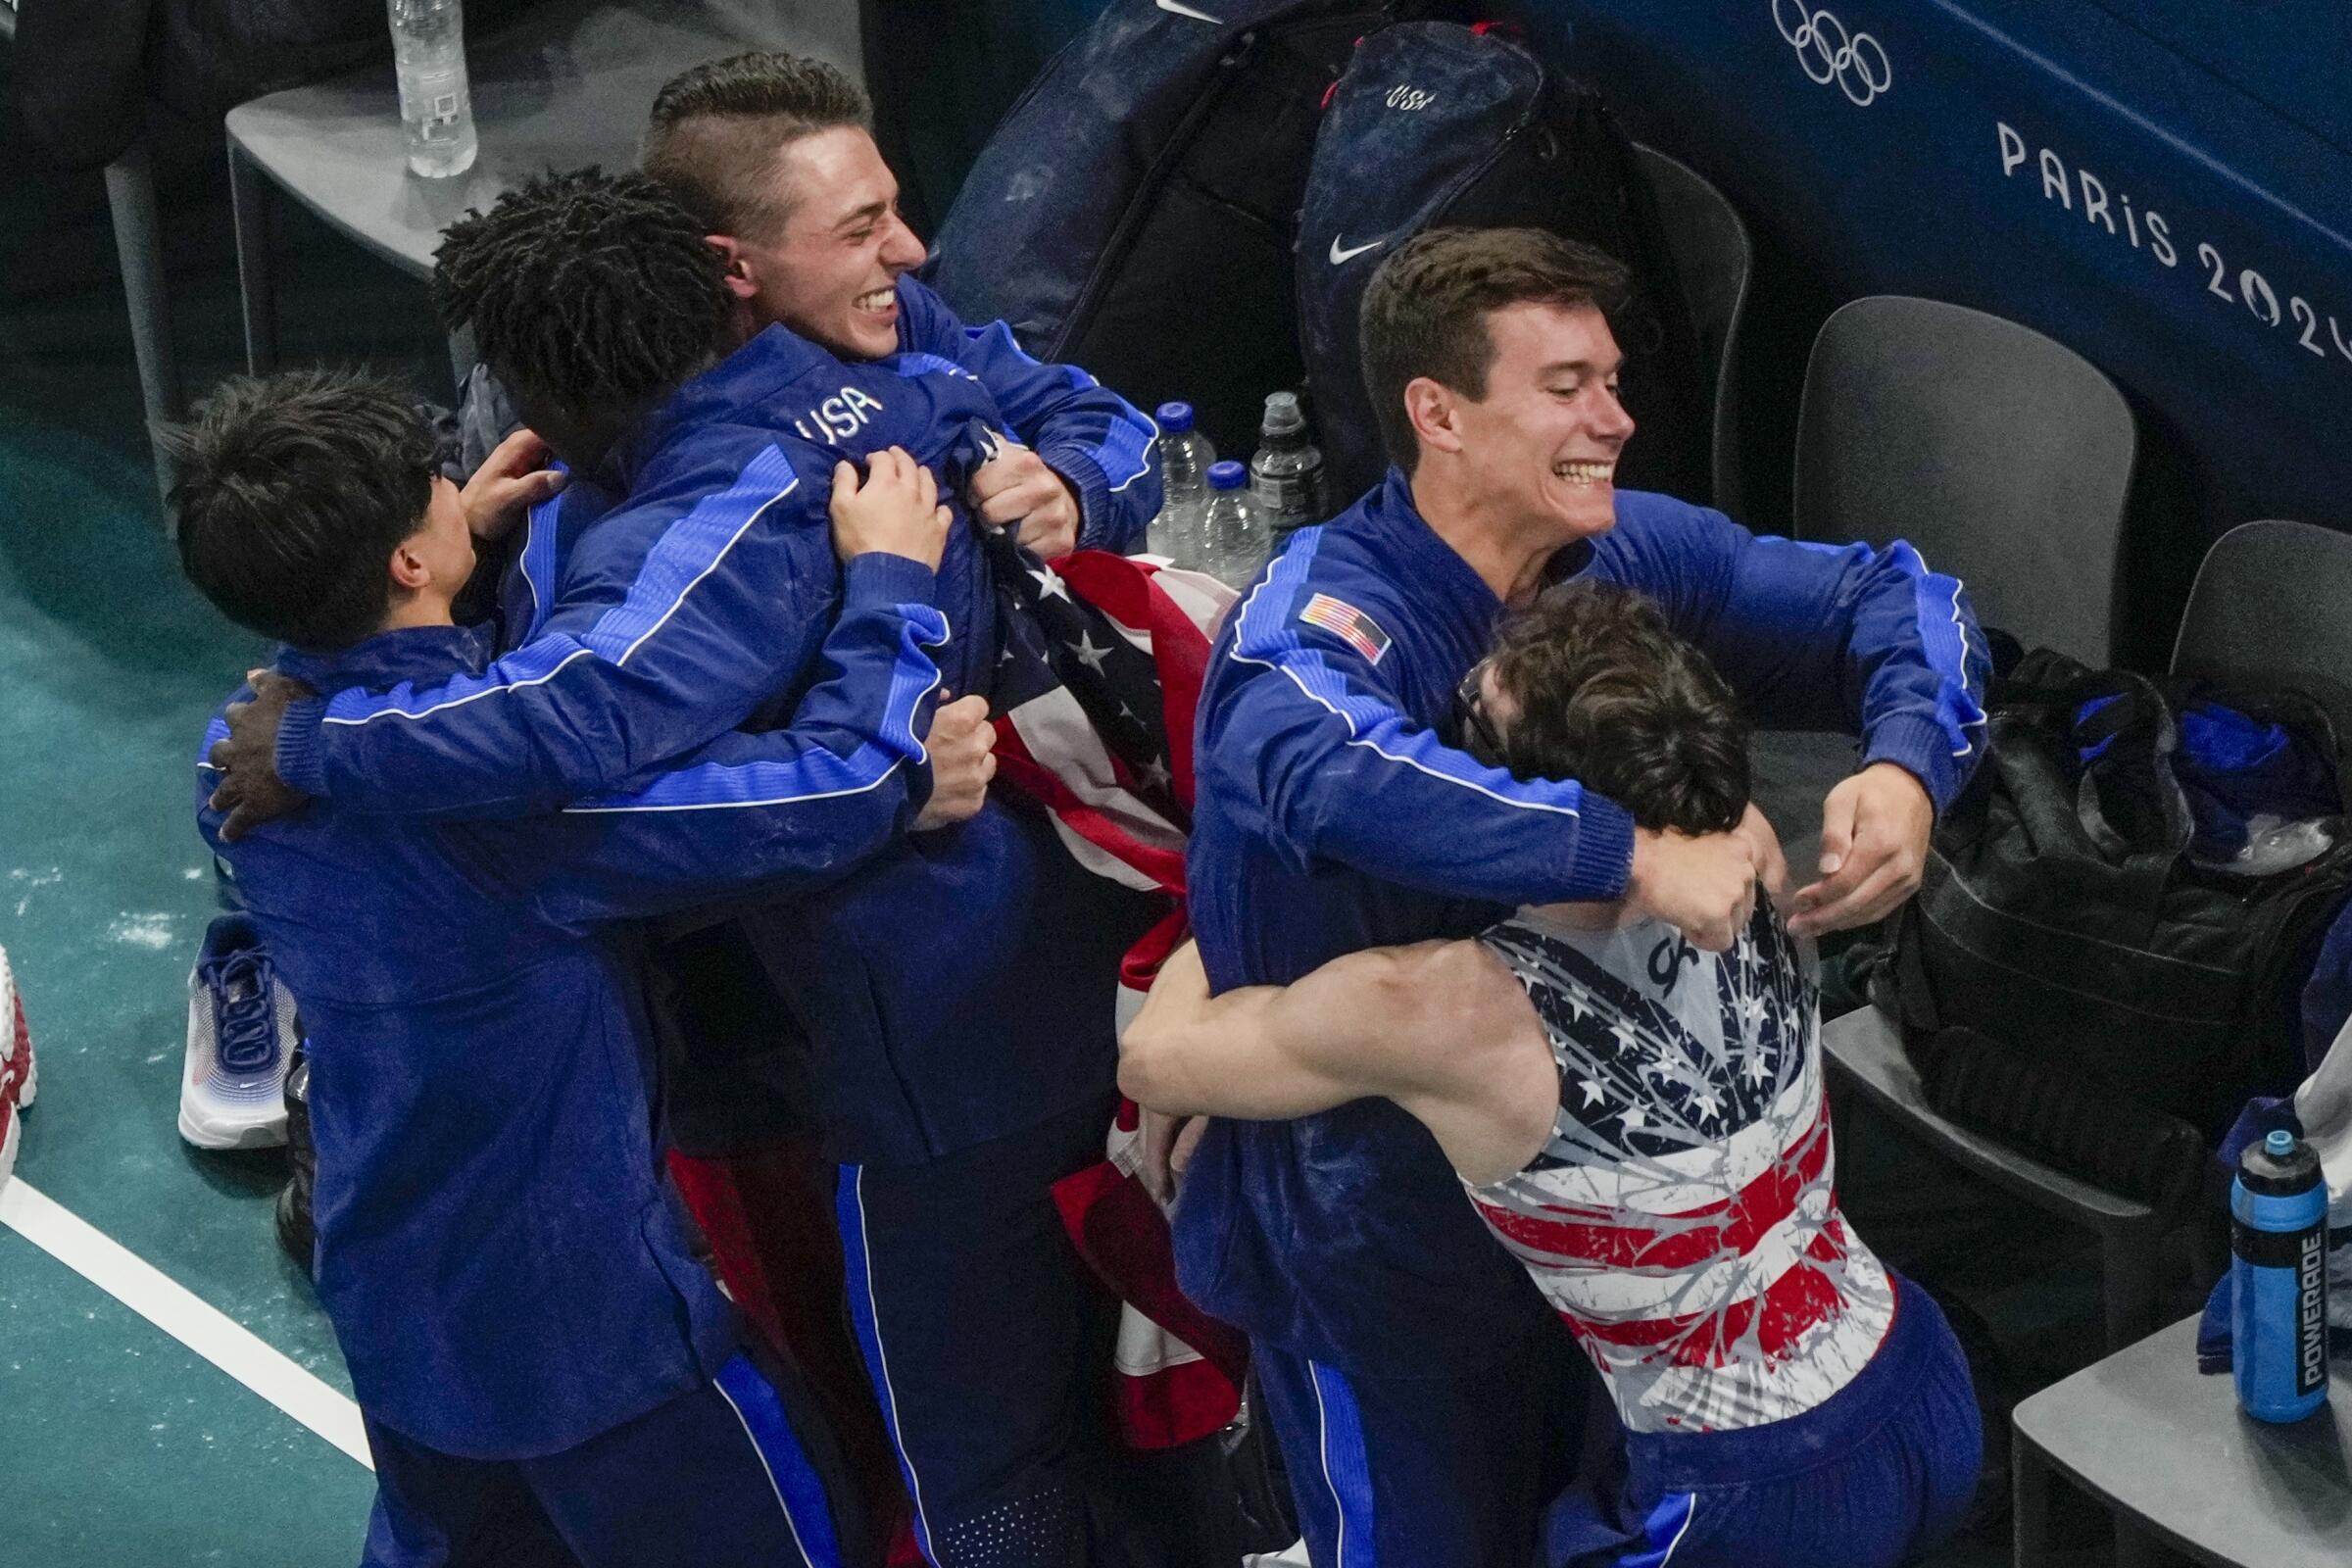 Members of the U.S. team hug after winning the bronze medal during the Olympic men's gymnastics team finals.